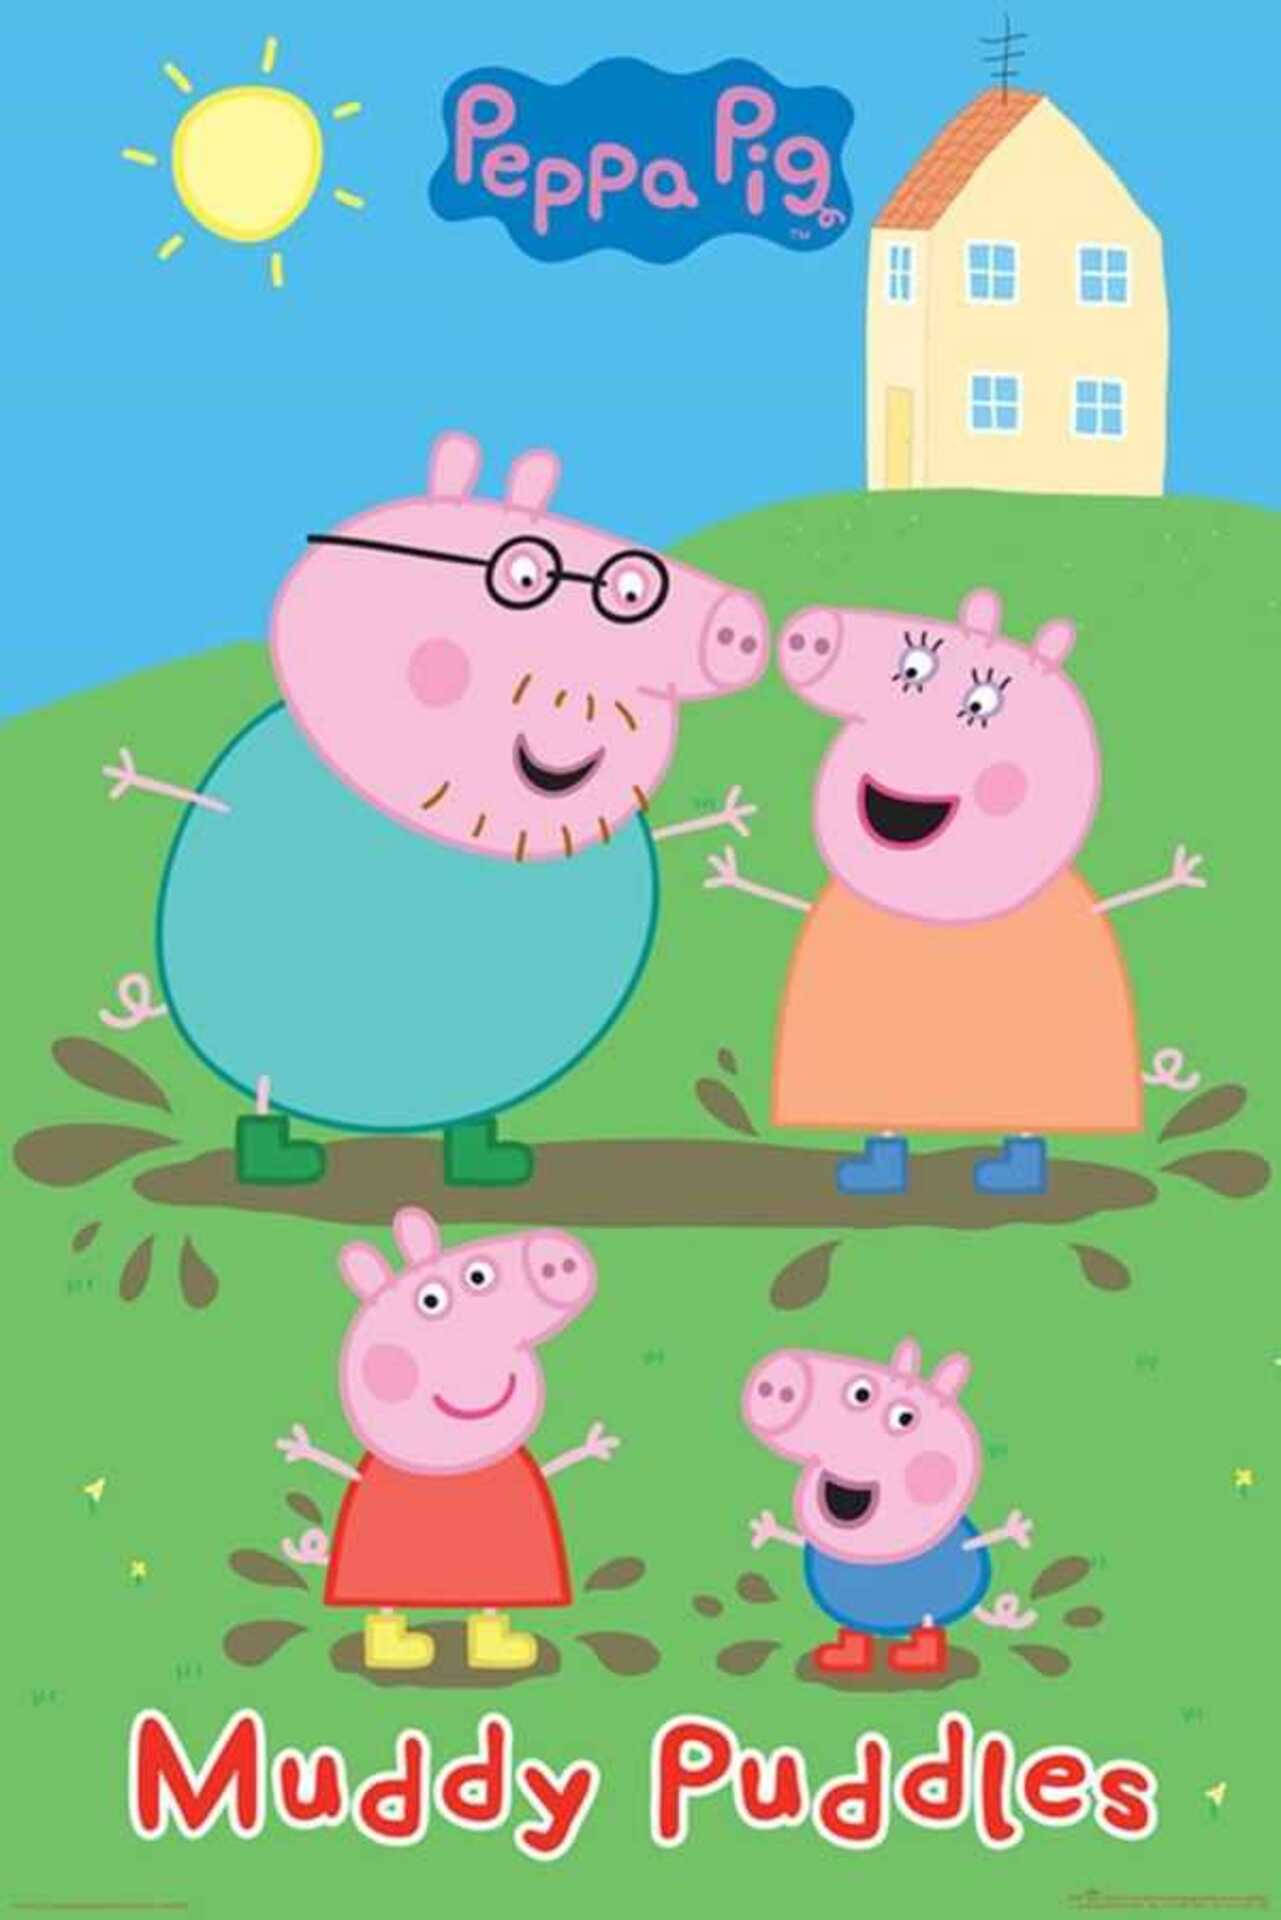 Peppa Pig and her friends playing in a muddy puddle Wallpaper